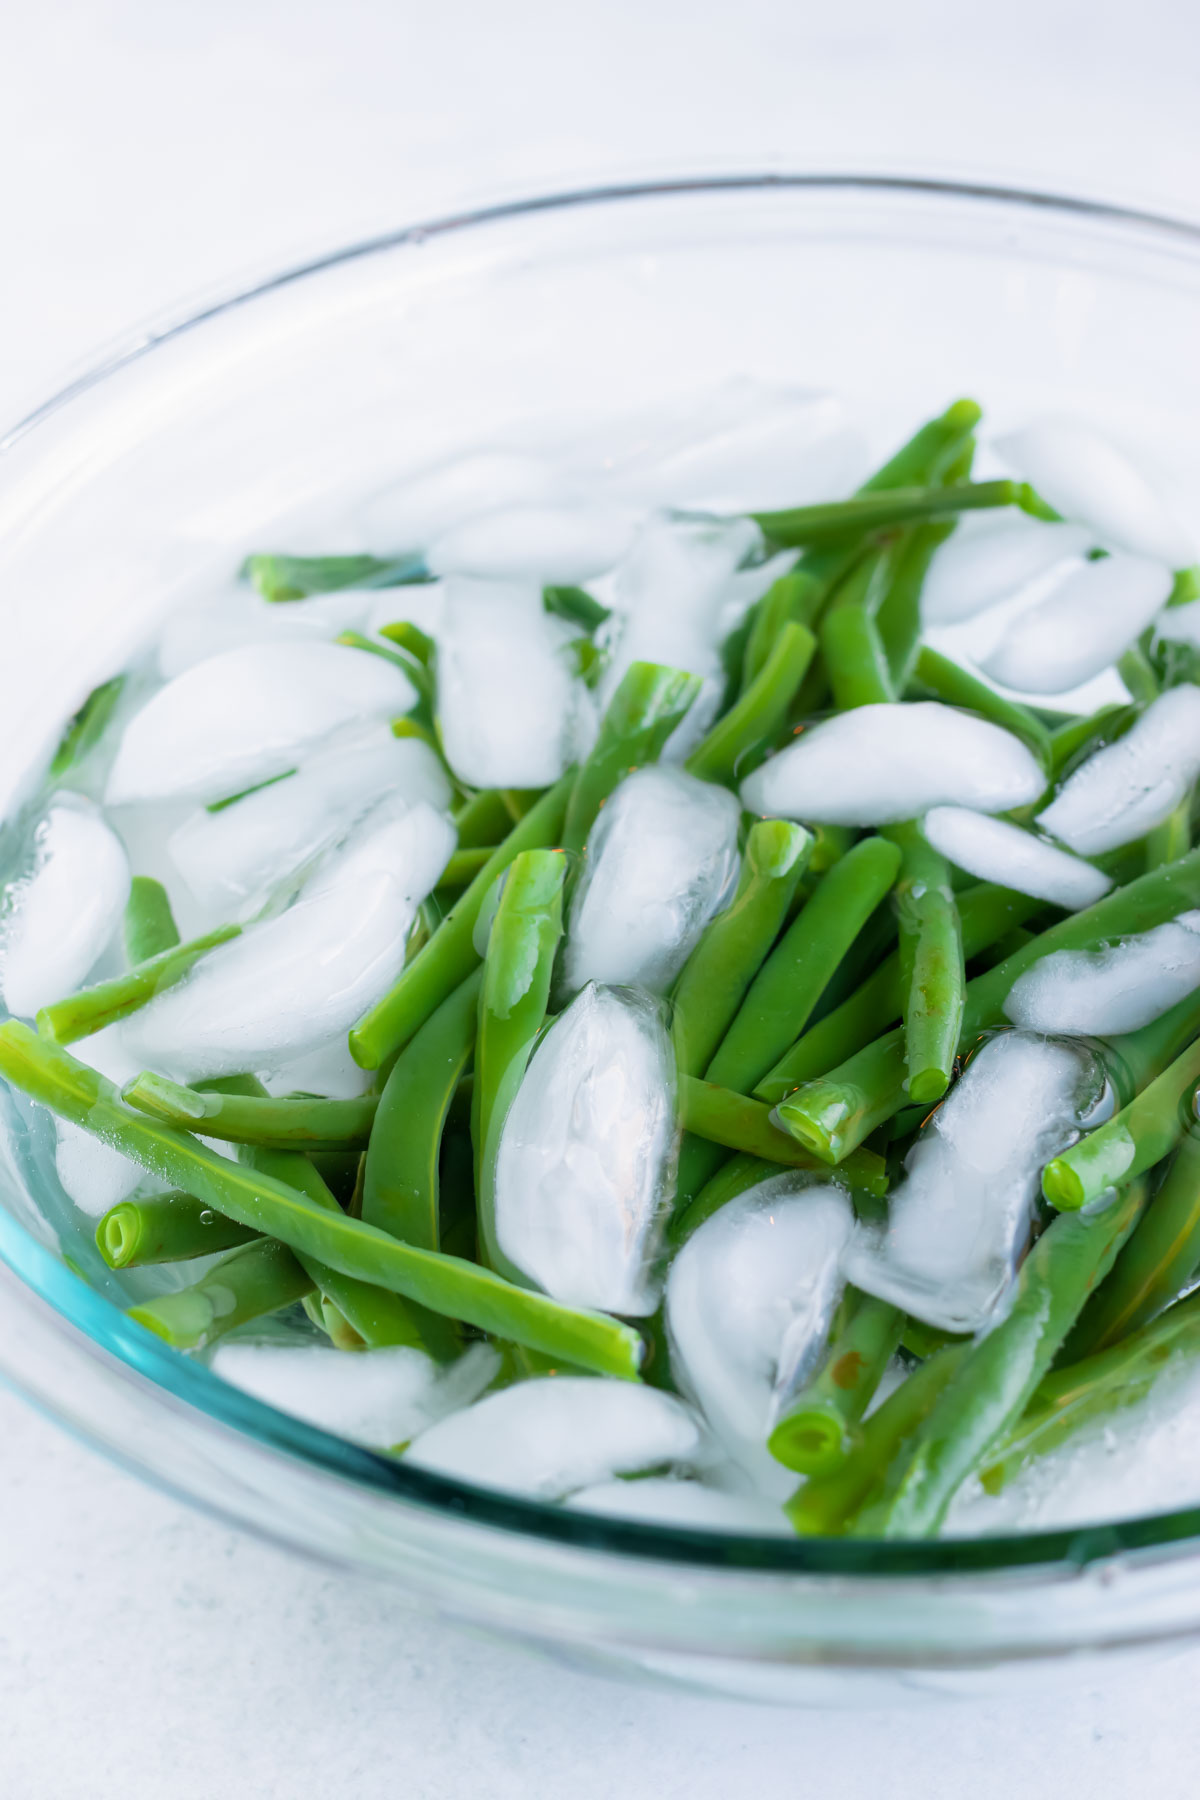 Blanching boiled green beans in an ice water bath.